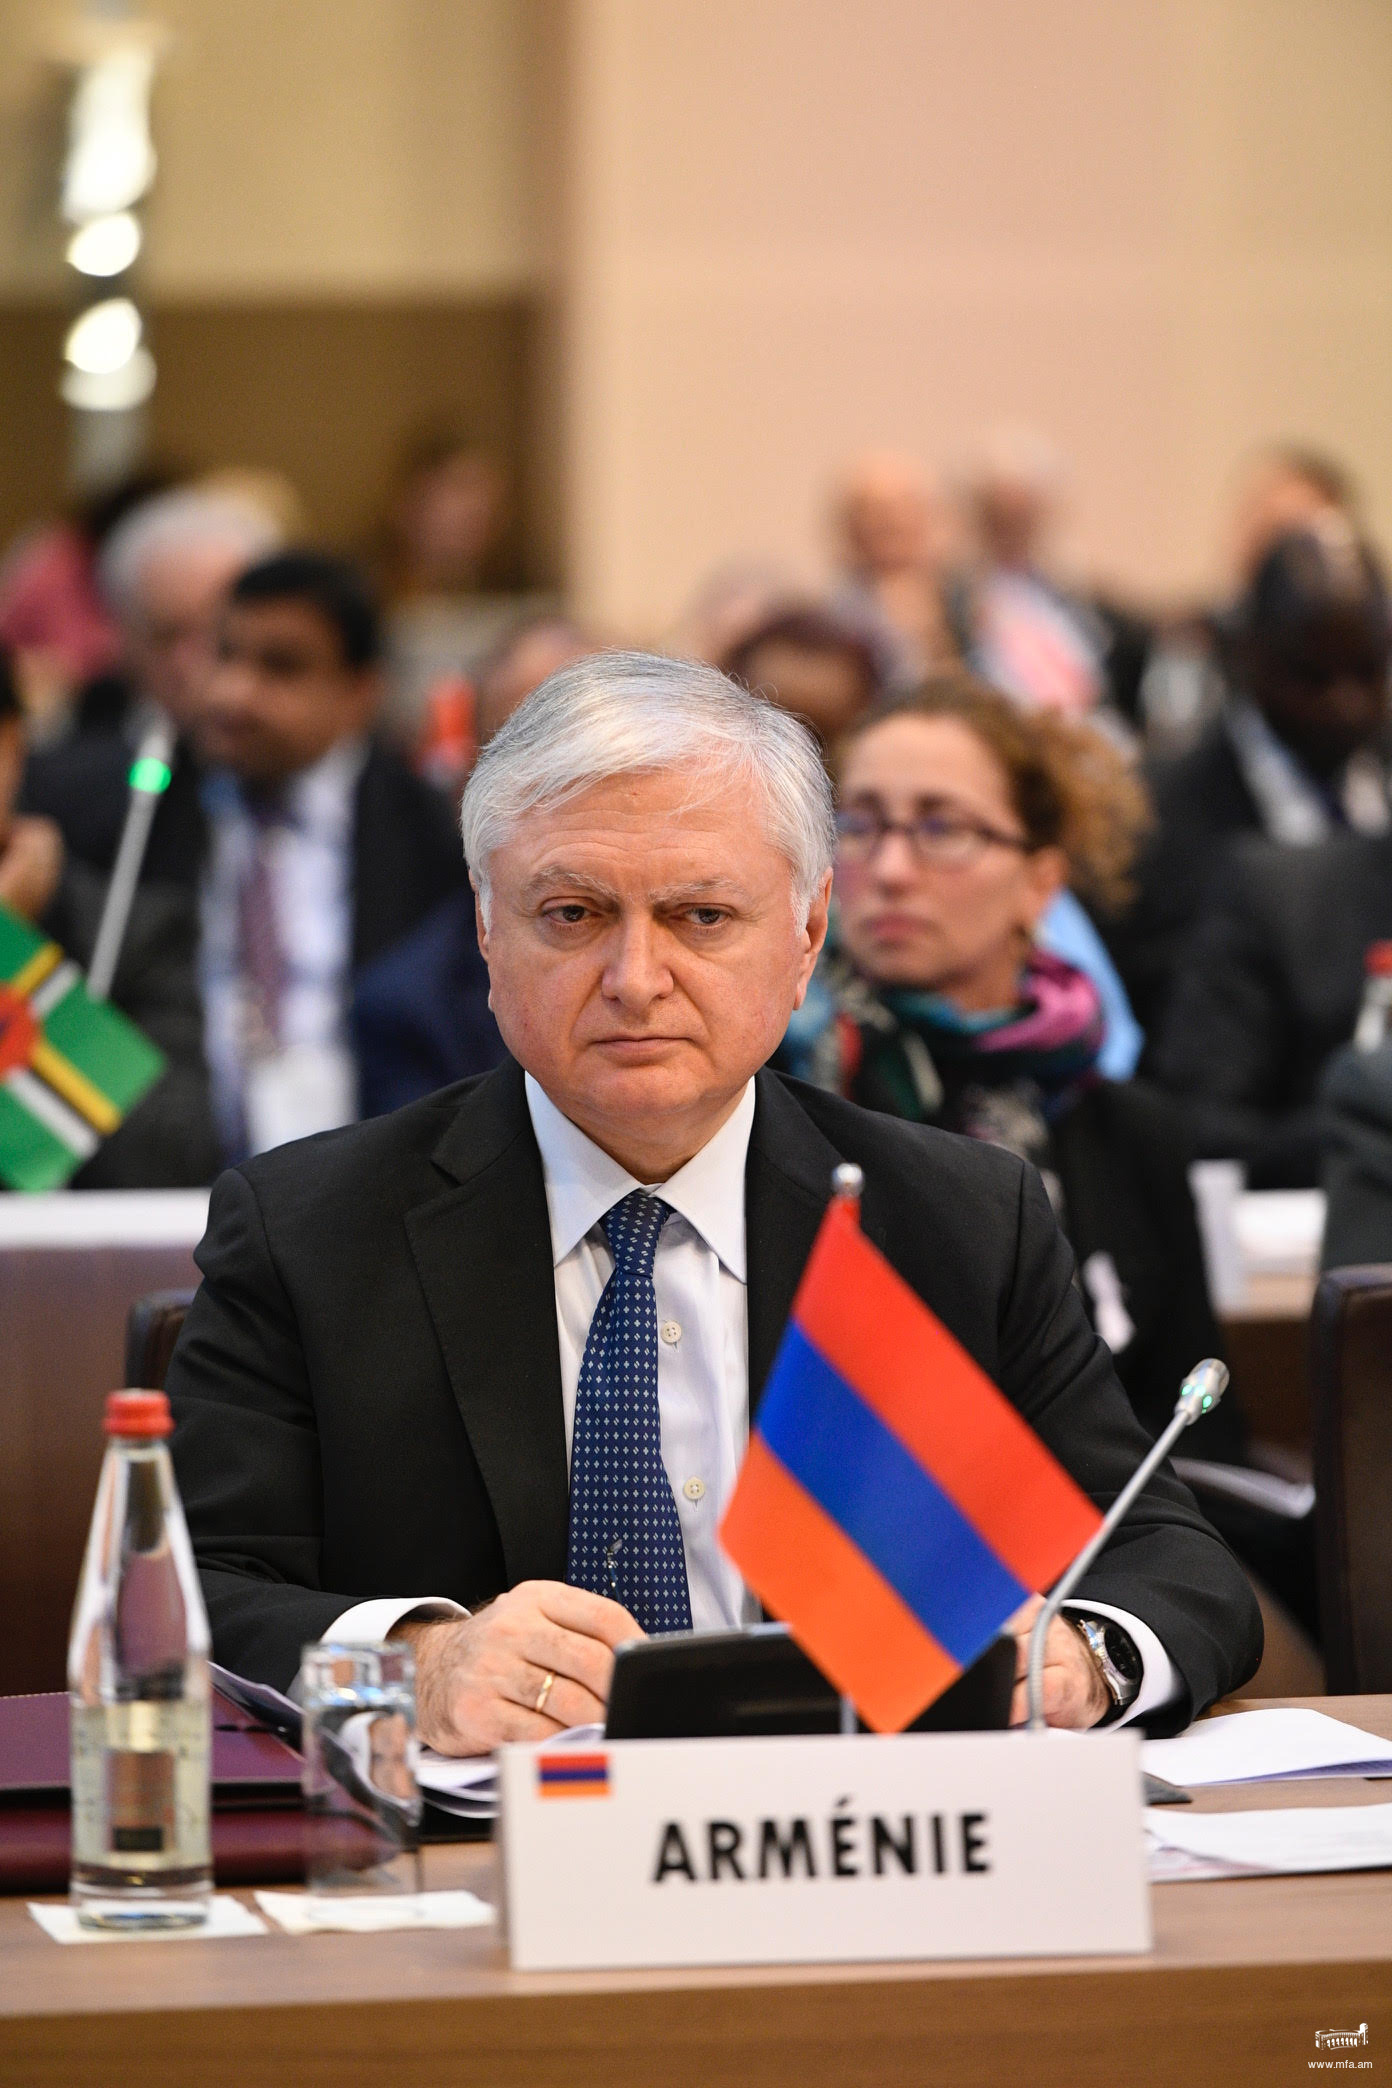 Armenia’s FM: Progress achieved with regards to protection of fundamental freedoms in Armenia is sustainable and irreversible